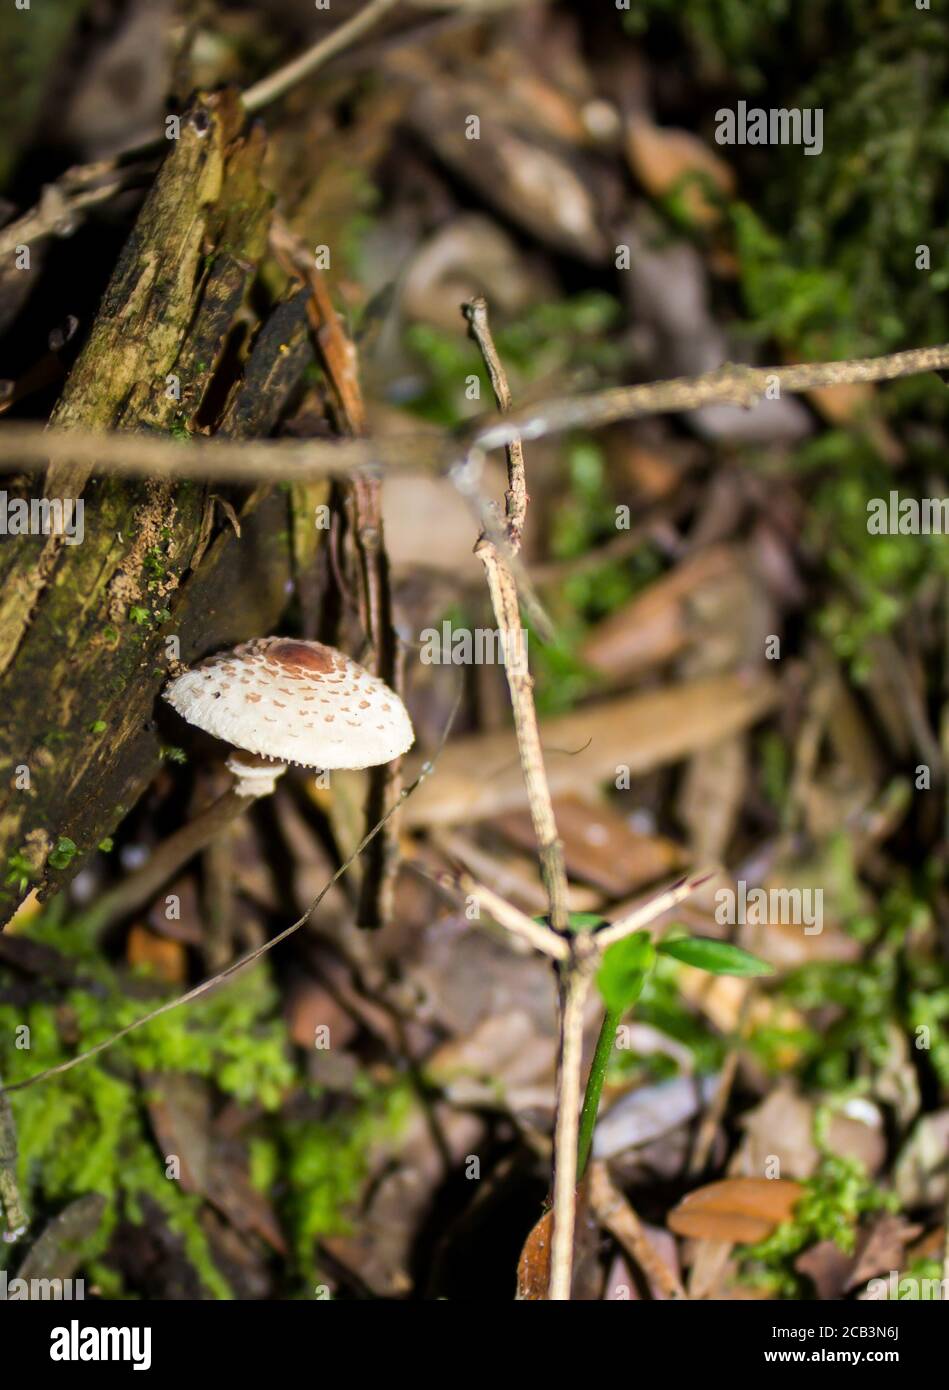 A small mushroom, growing in the undergrowth in a Forested gorge in the Drakensberg Mountains Stock Photo